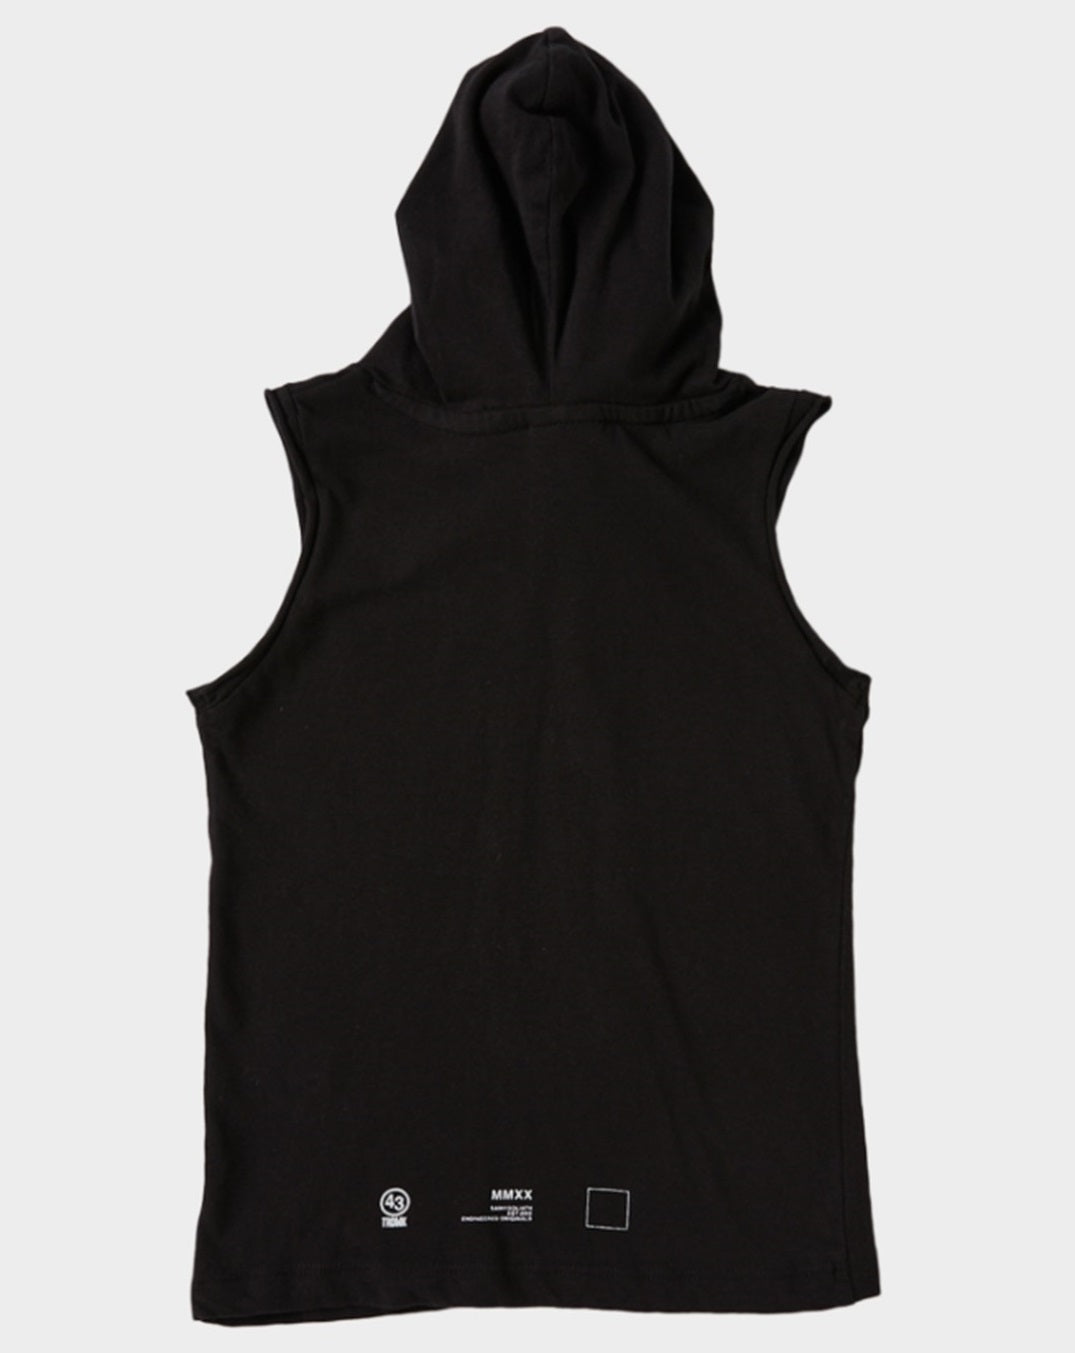 St Goliath Prime Muscle Tee - Black